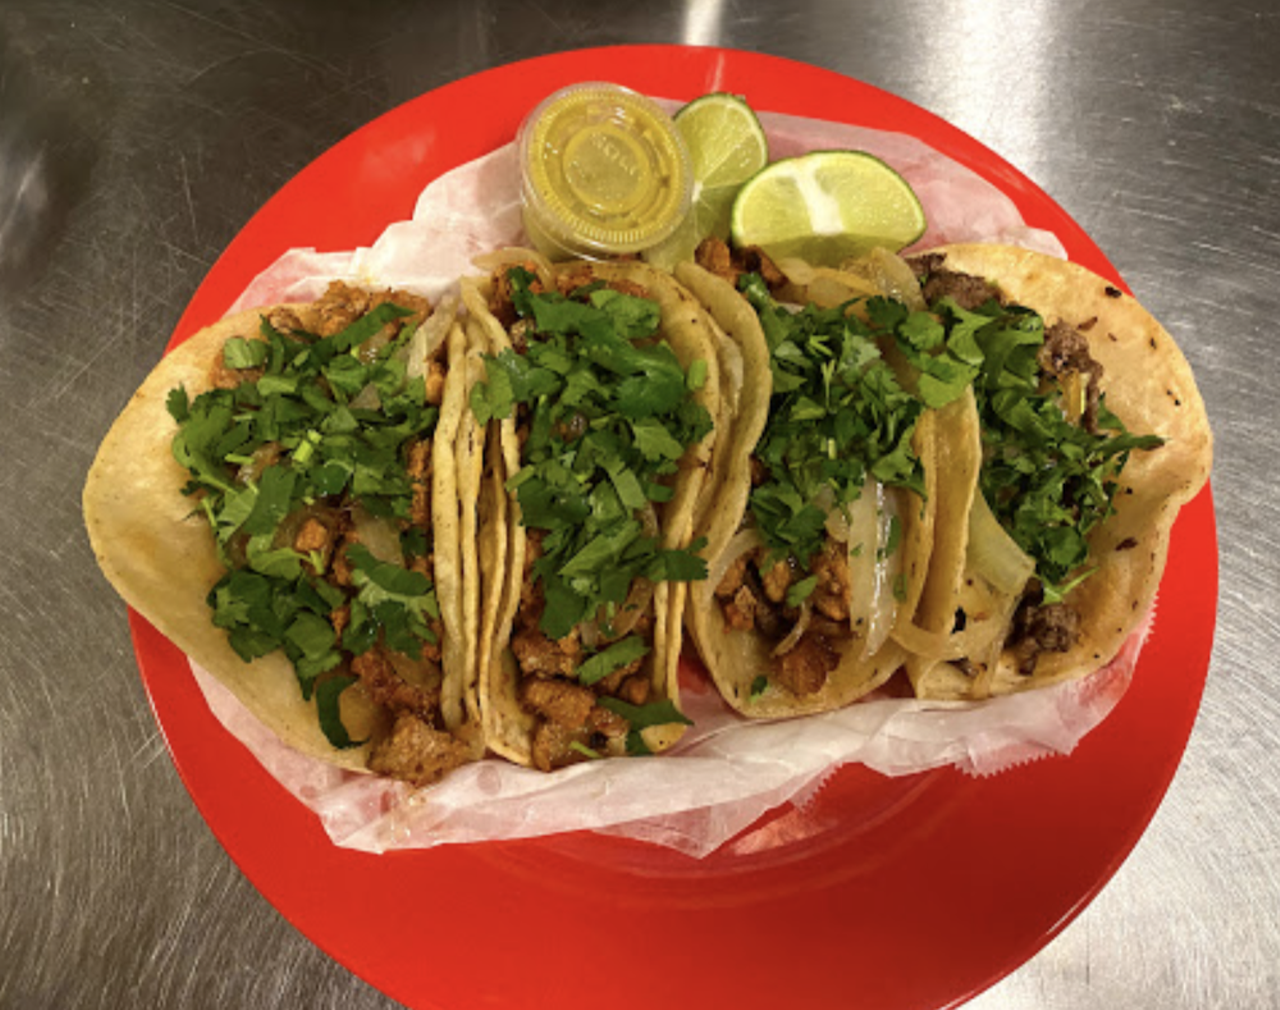 Hector’s Mexican Food
3121 E Hillsborough Ave., Tampa, 813-234-3646
The food trailer in East Tampa is a hideaway for all things traditional, the 24-hour spot helping you get your late night fix of sopes and Argentinian pupusas.
Photo via Hector’s Mexican Food/Google